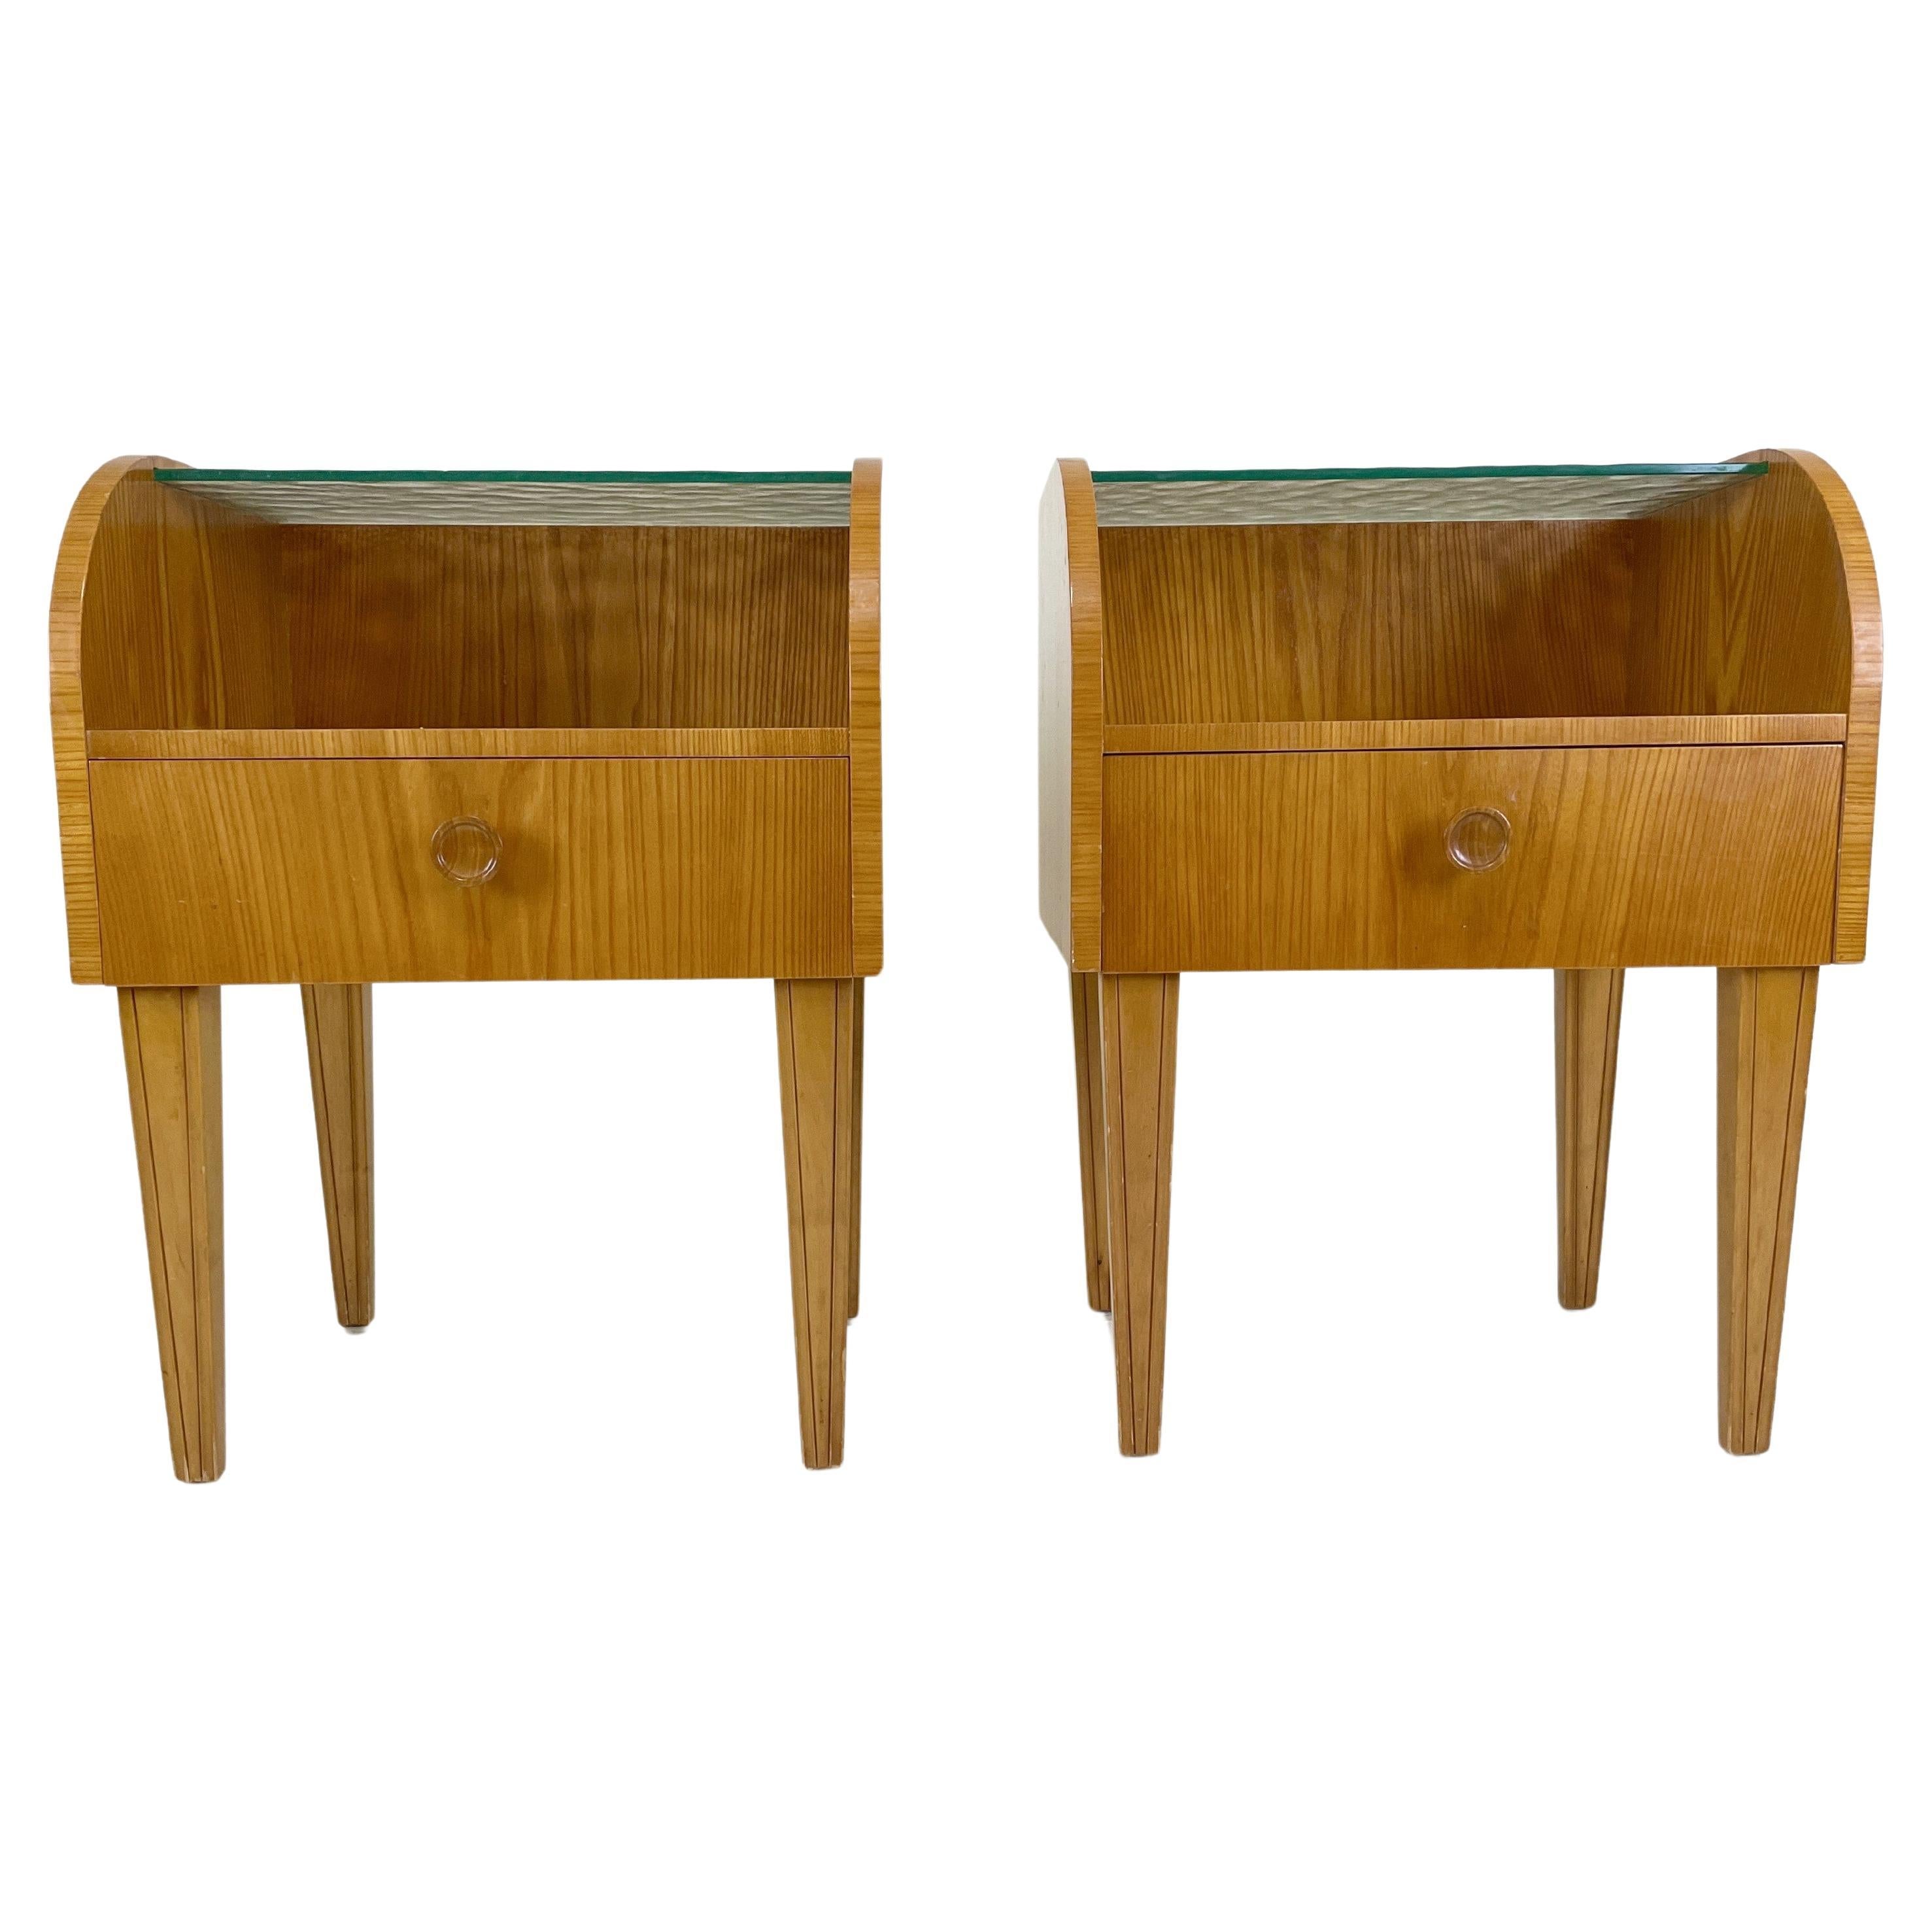 Pair of Finnish Modern Bedside Tables attributed to Margaret Nordman, 1930s